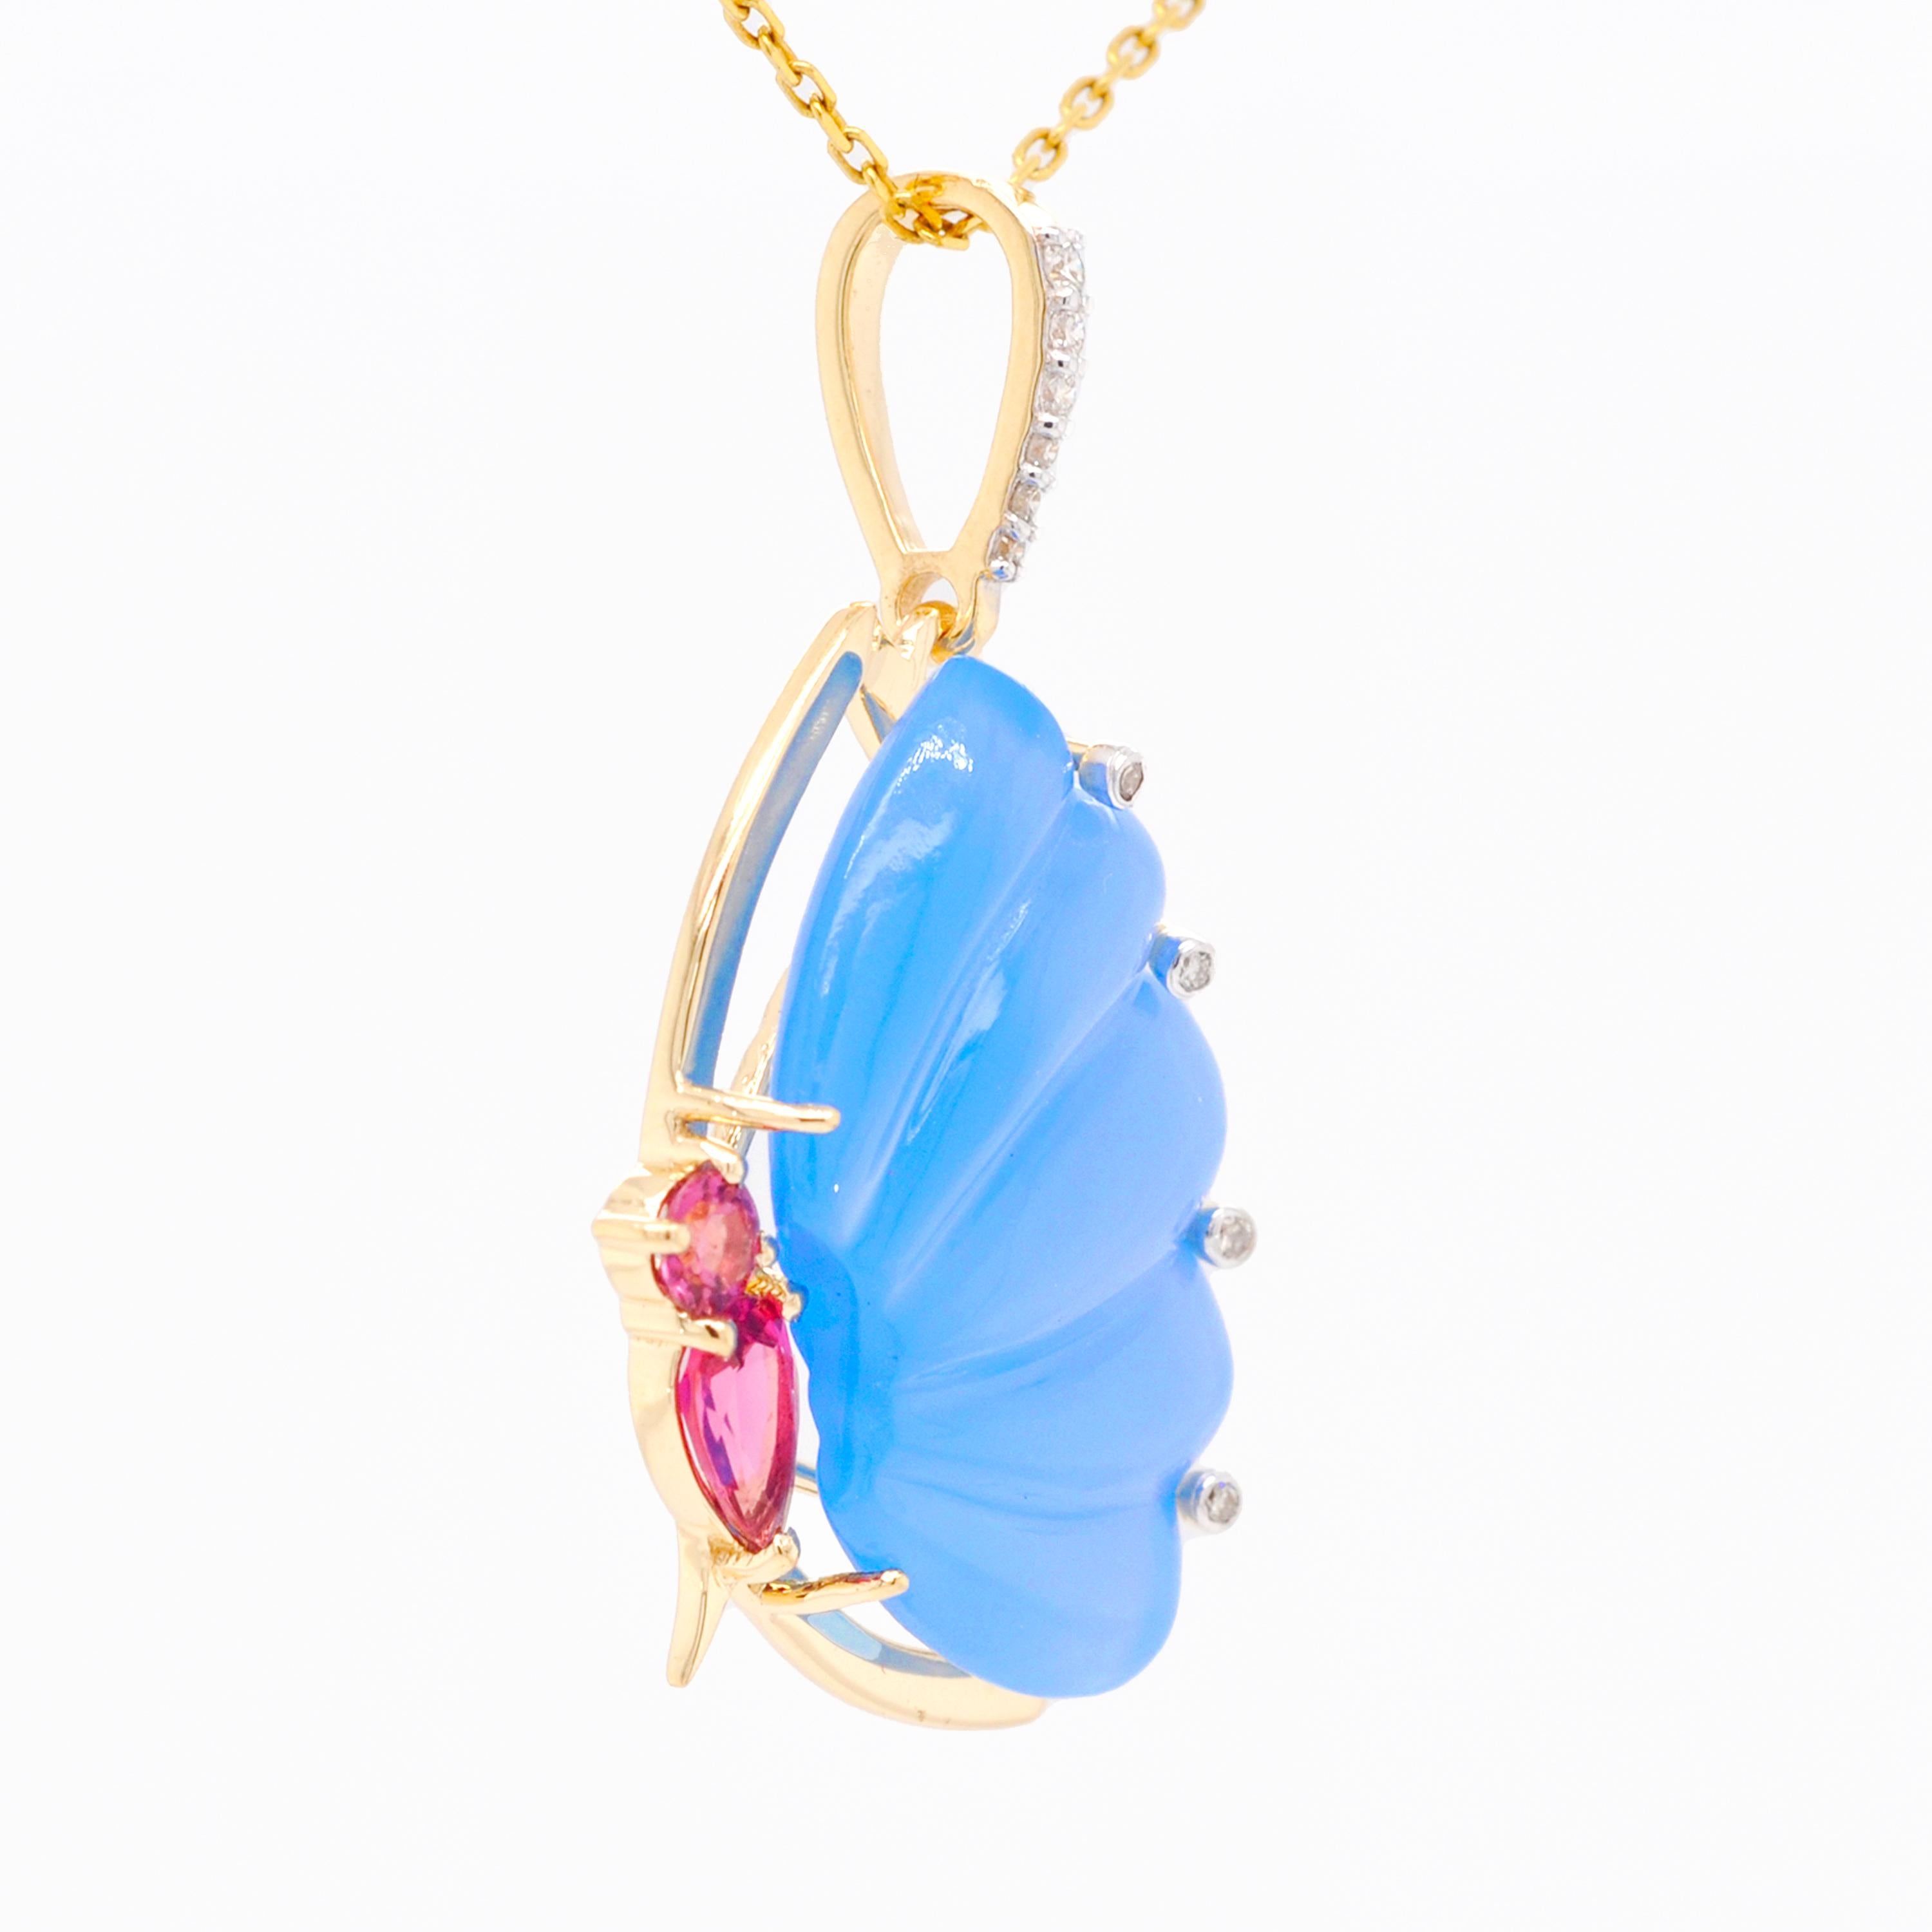 Mixed Cut 18 Karat Gold Pink Tourmaline Blue Chalcedony Butterfly Carving Diamond Pendant For Sale